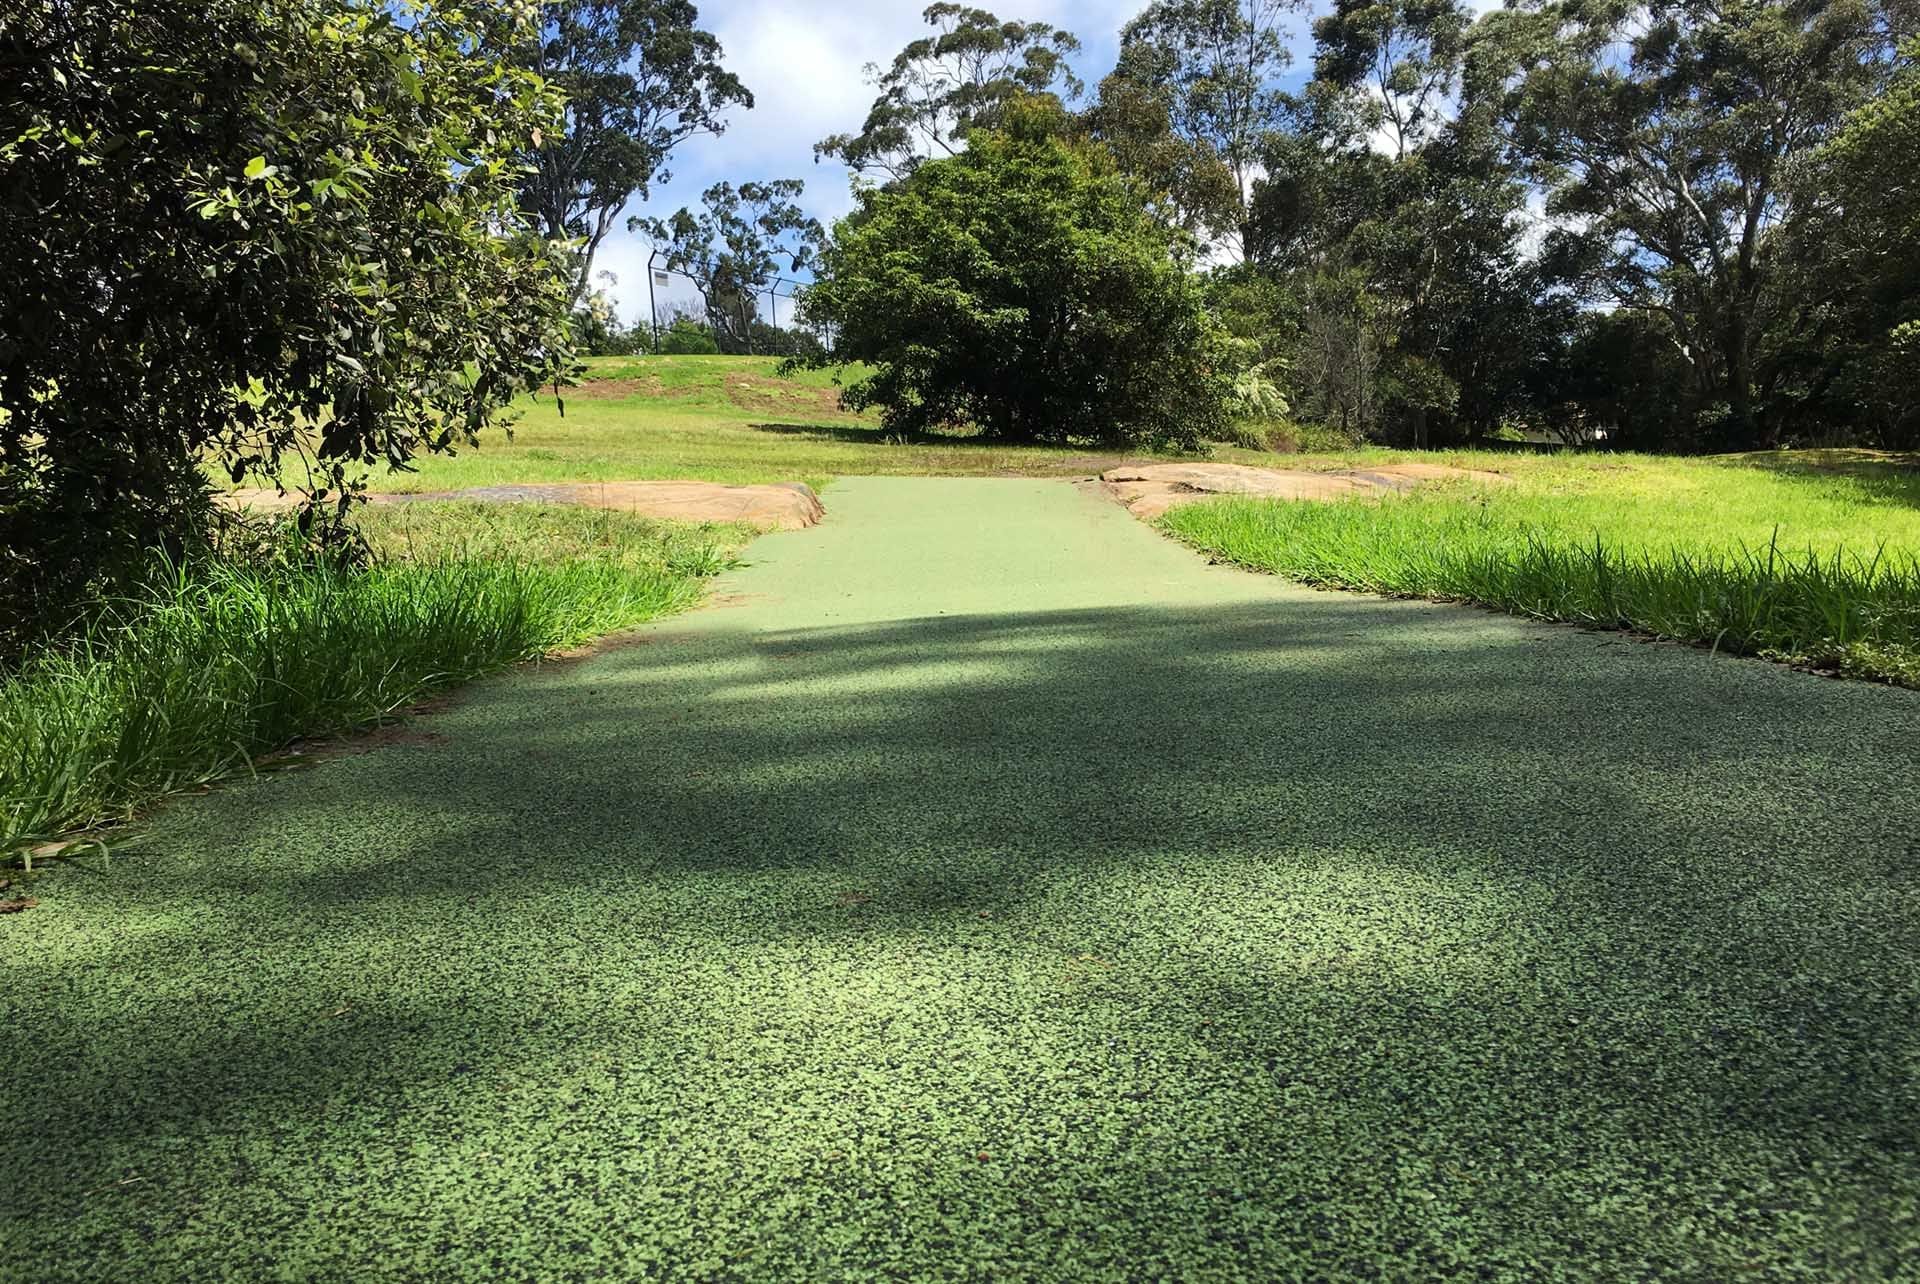 Lane Cove Golf Course by Synthetic Grass & Rubber Surfaces Image -5bce4566900e8